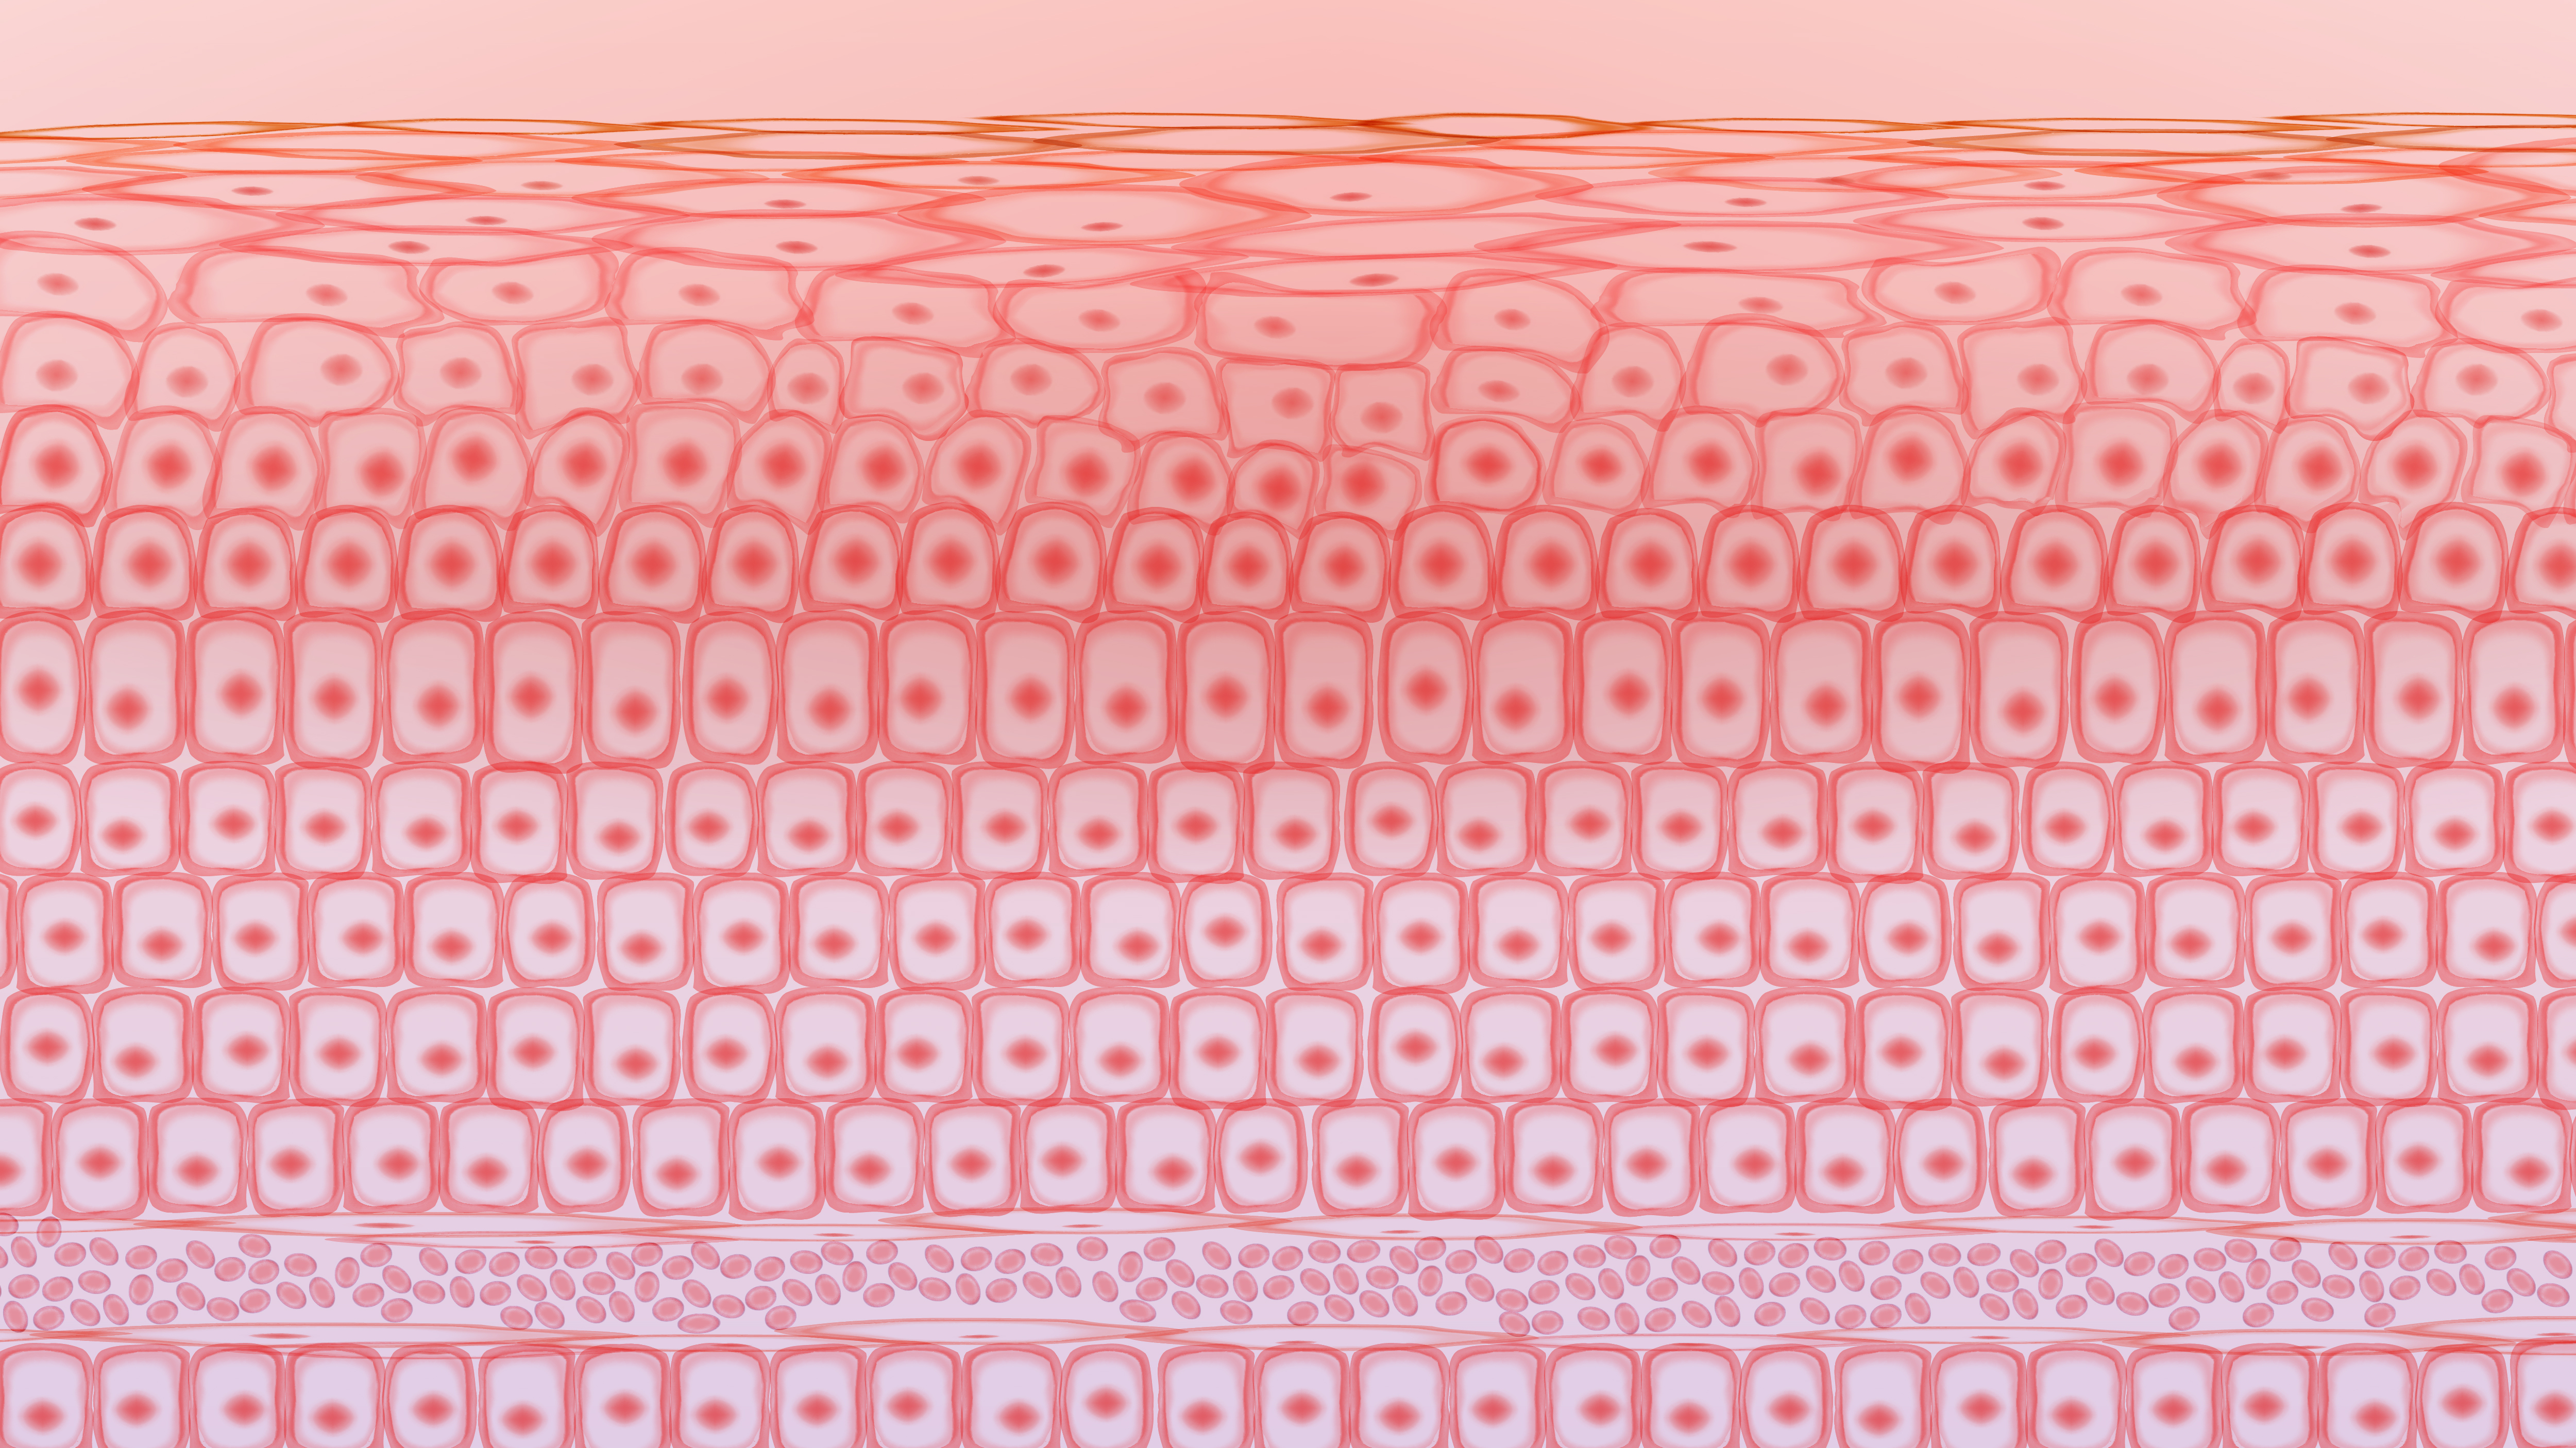 Illustration of skin tissue cells, layers of skin, blood in vein